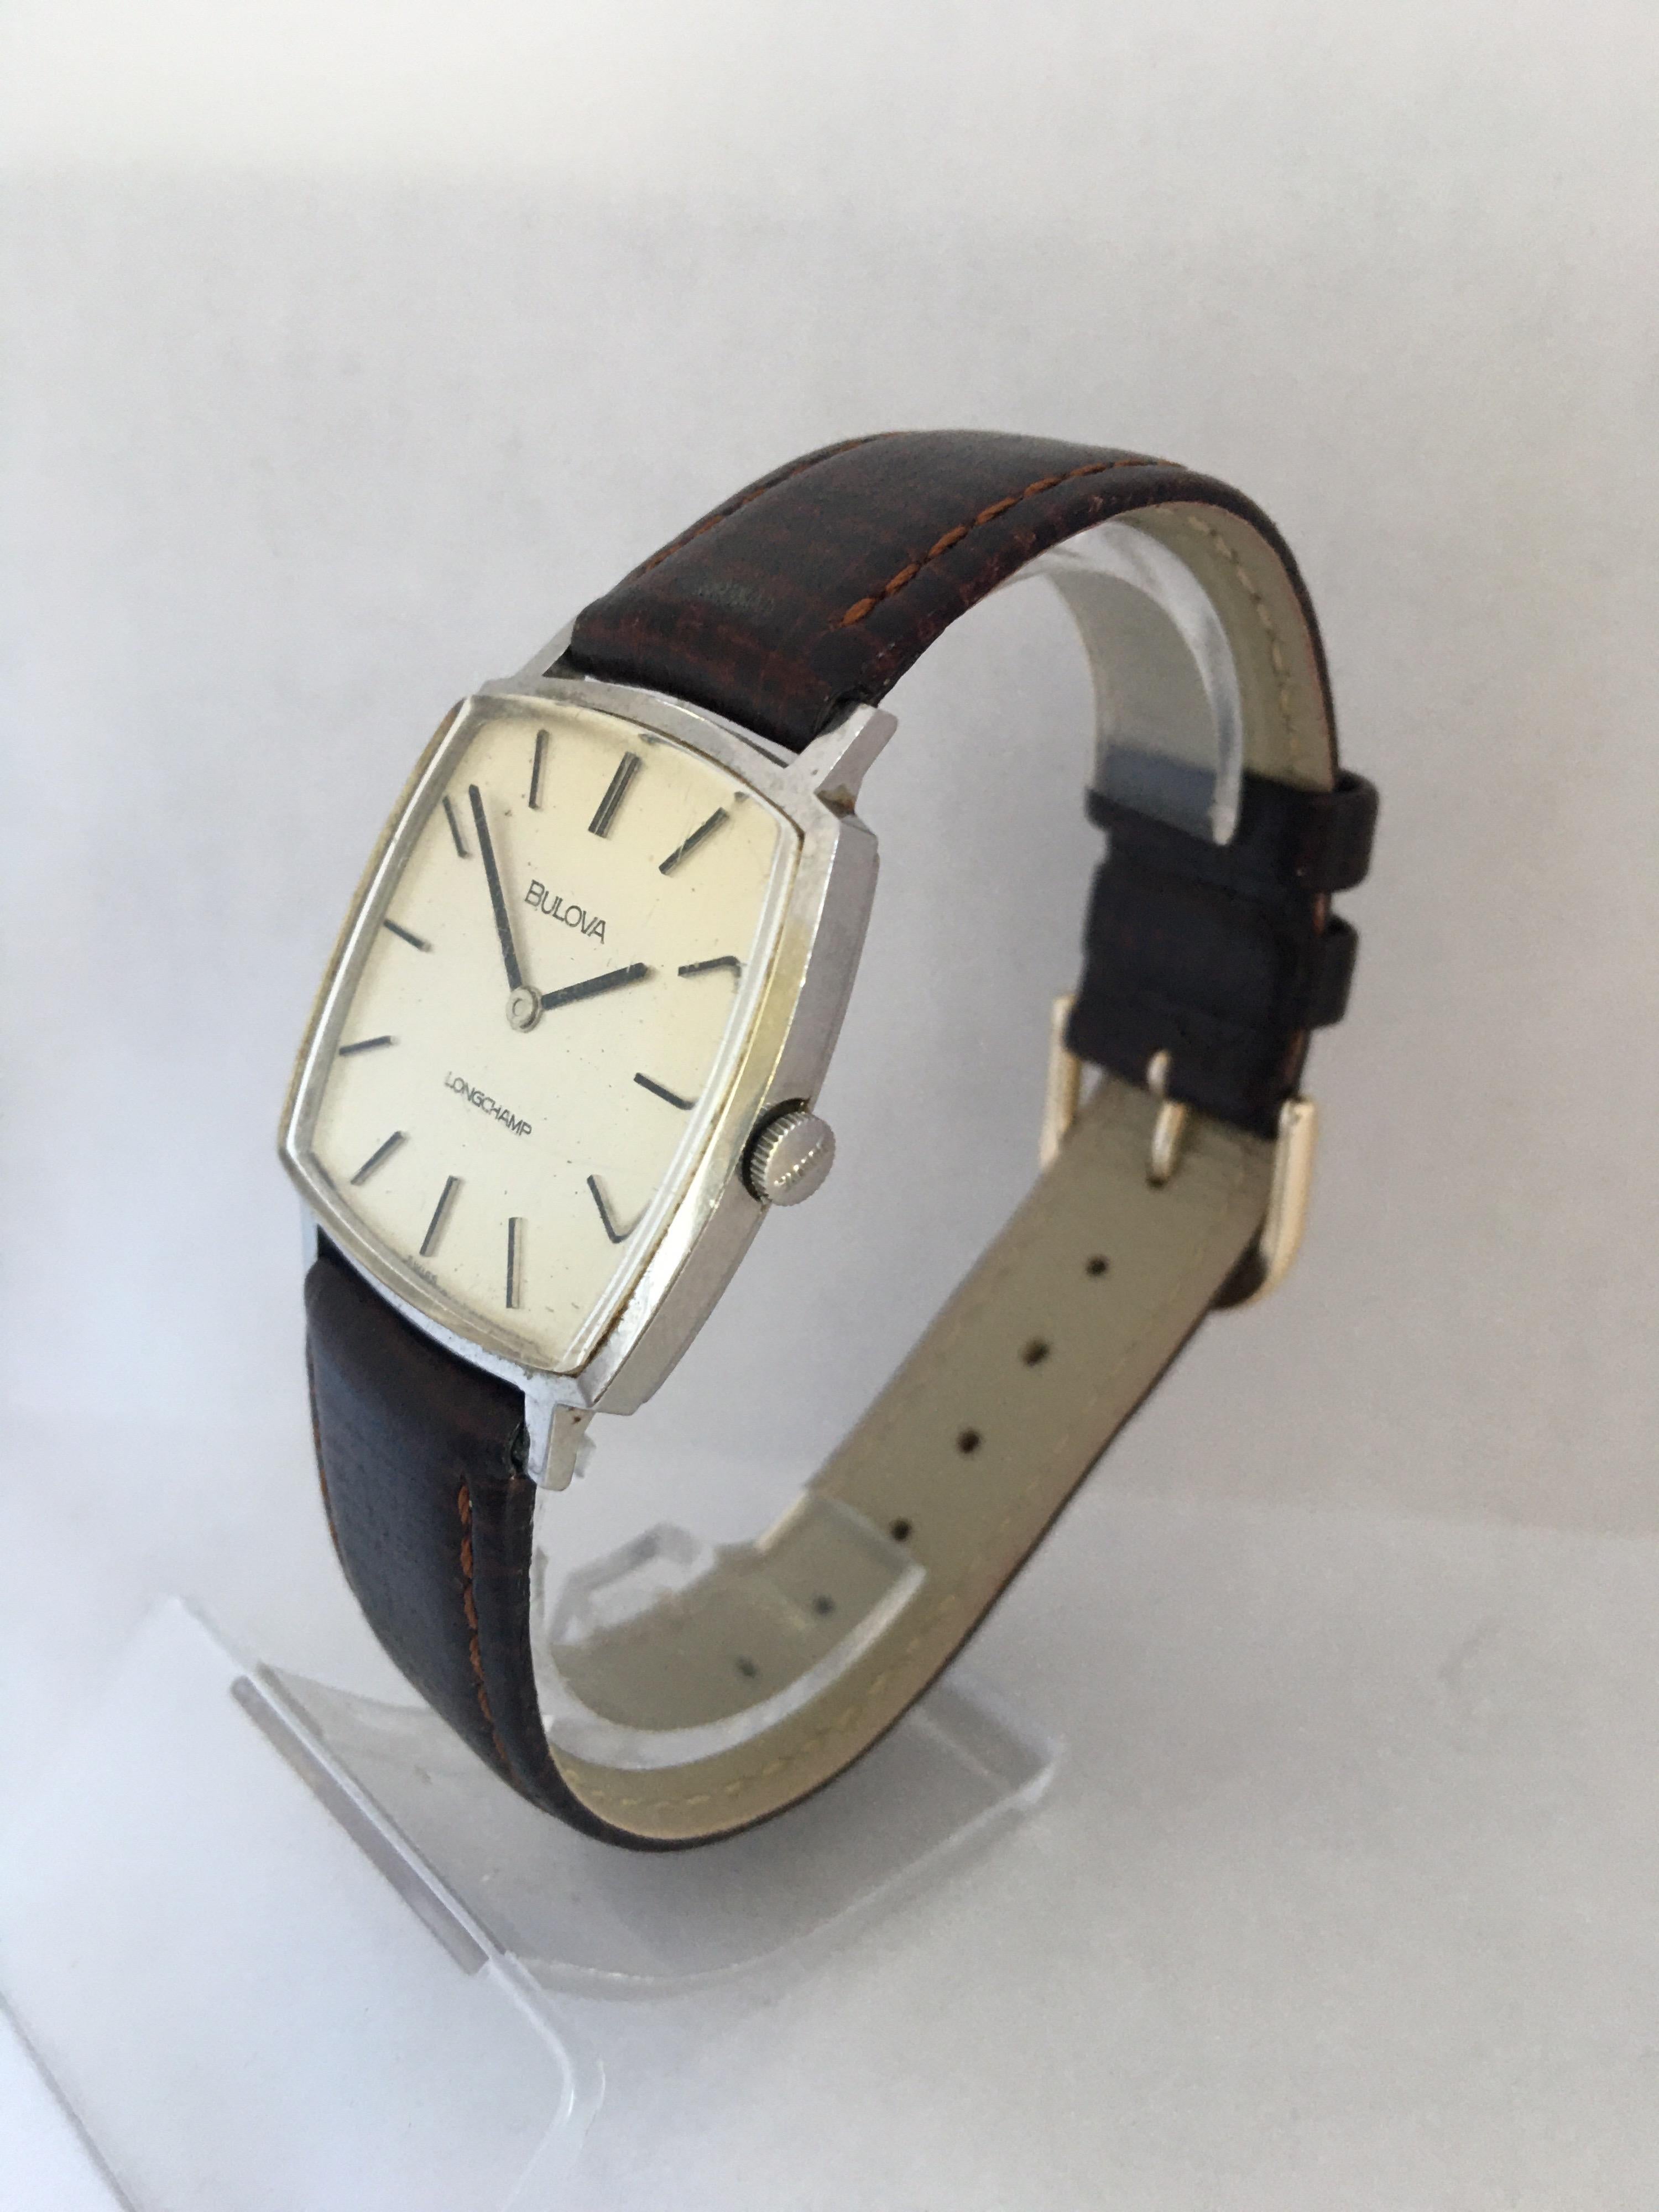 This beautiful classic hand winding watch is in good working condition and it is running well. Visible signs of ageing and wear. The strap buckle is gold plated as shown. Watch dimensions are 31mm wide and 39mm long. 

Please study the images